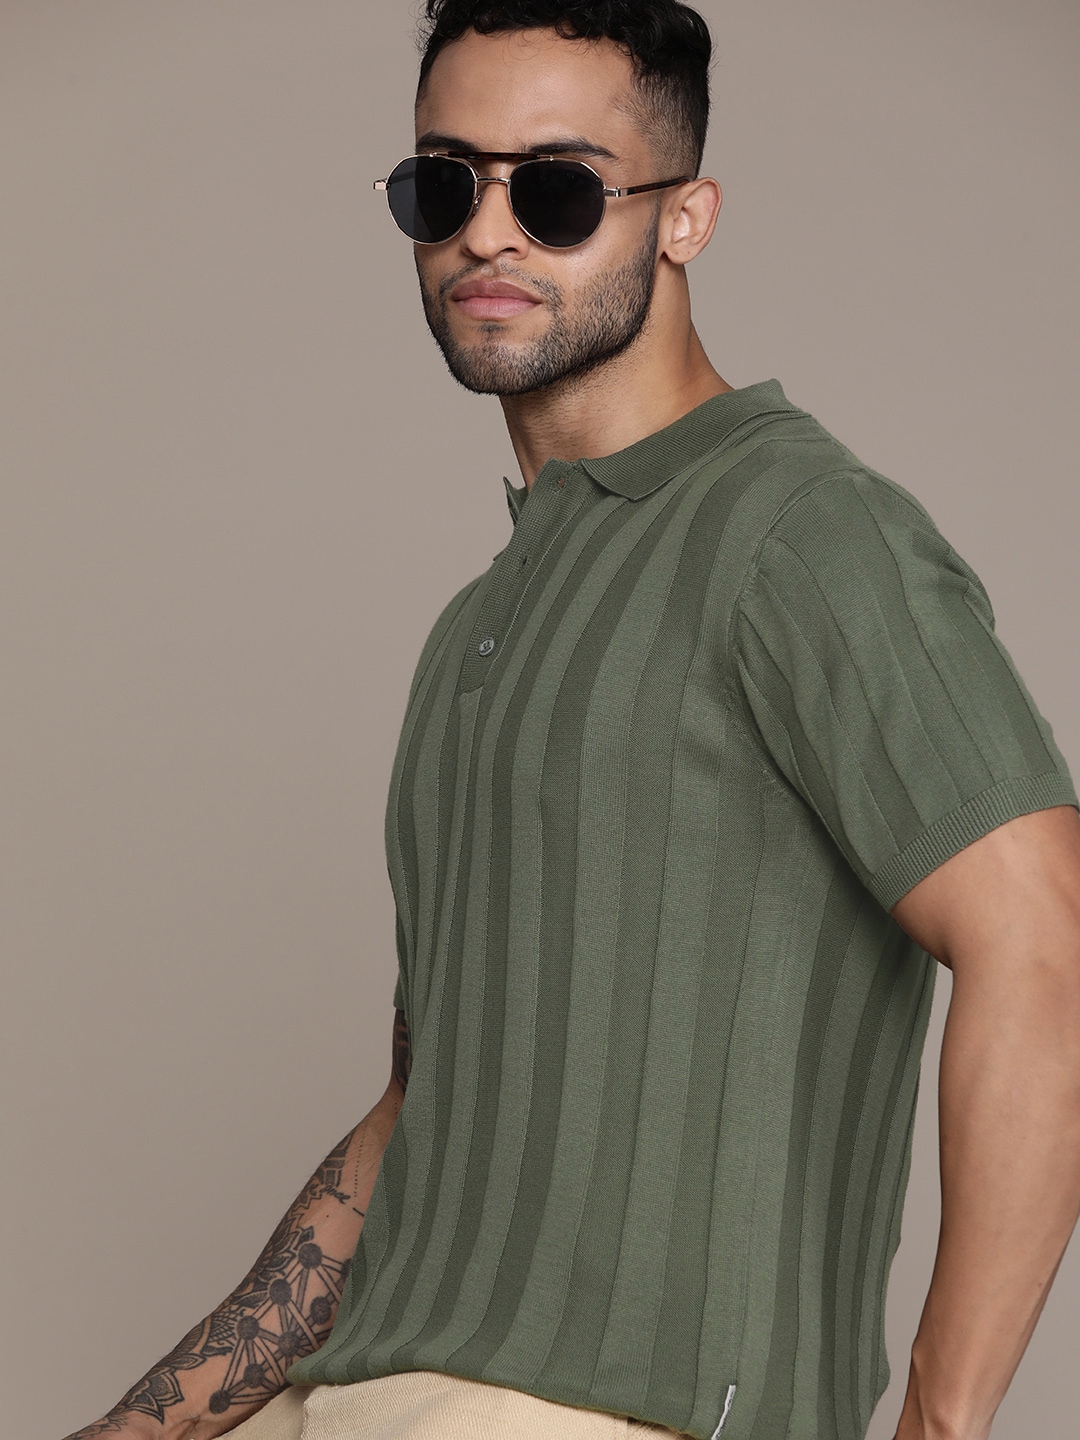 The Roadster Lifestyle Co. Ribbed Pure Cotton Polo Collar T-shirt